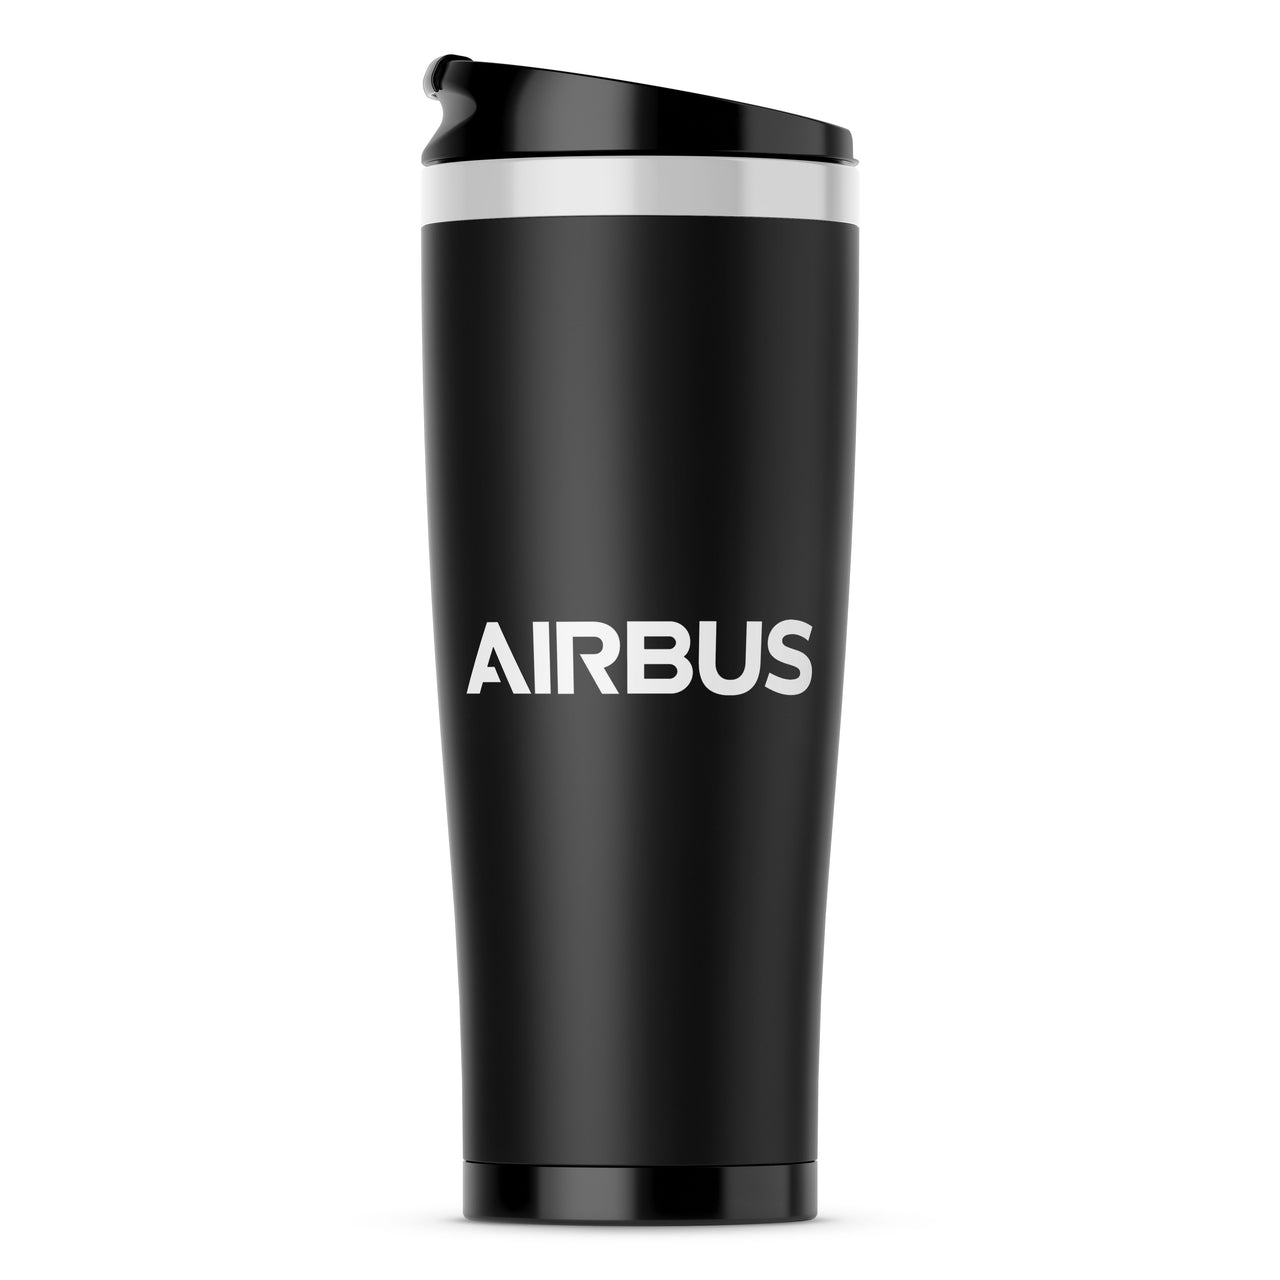 Airbus & Text Designed Stainless Steel Travel Mugs